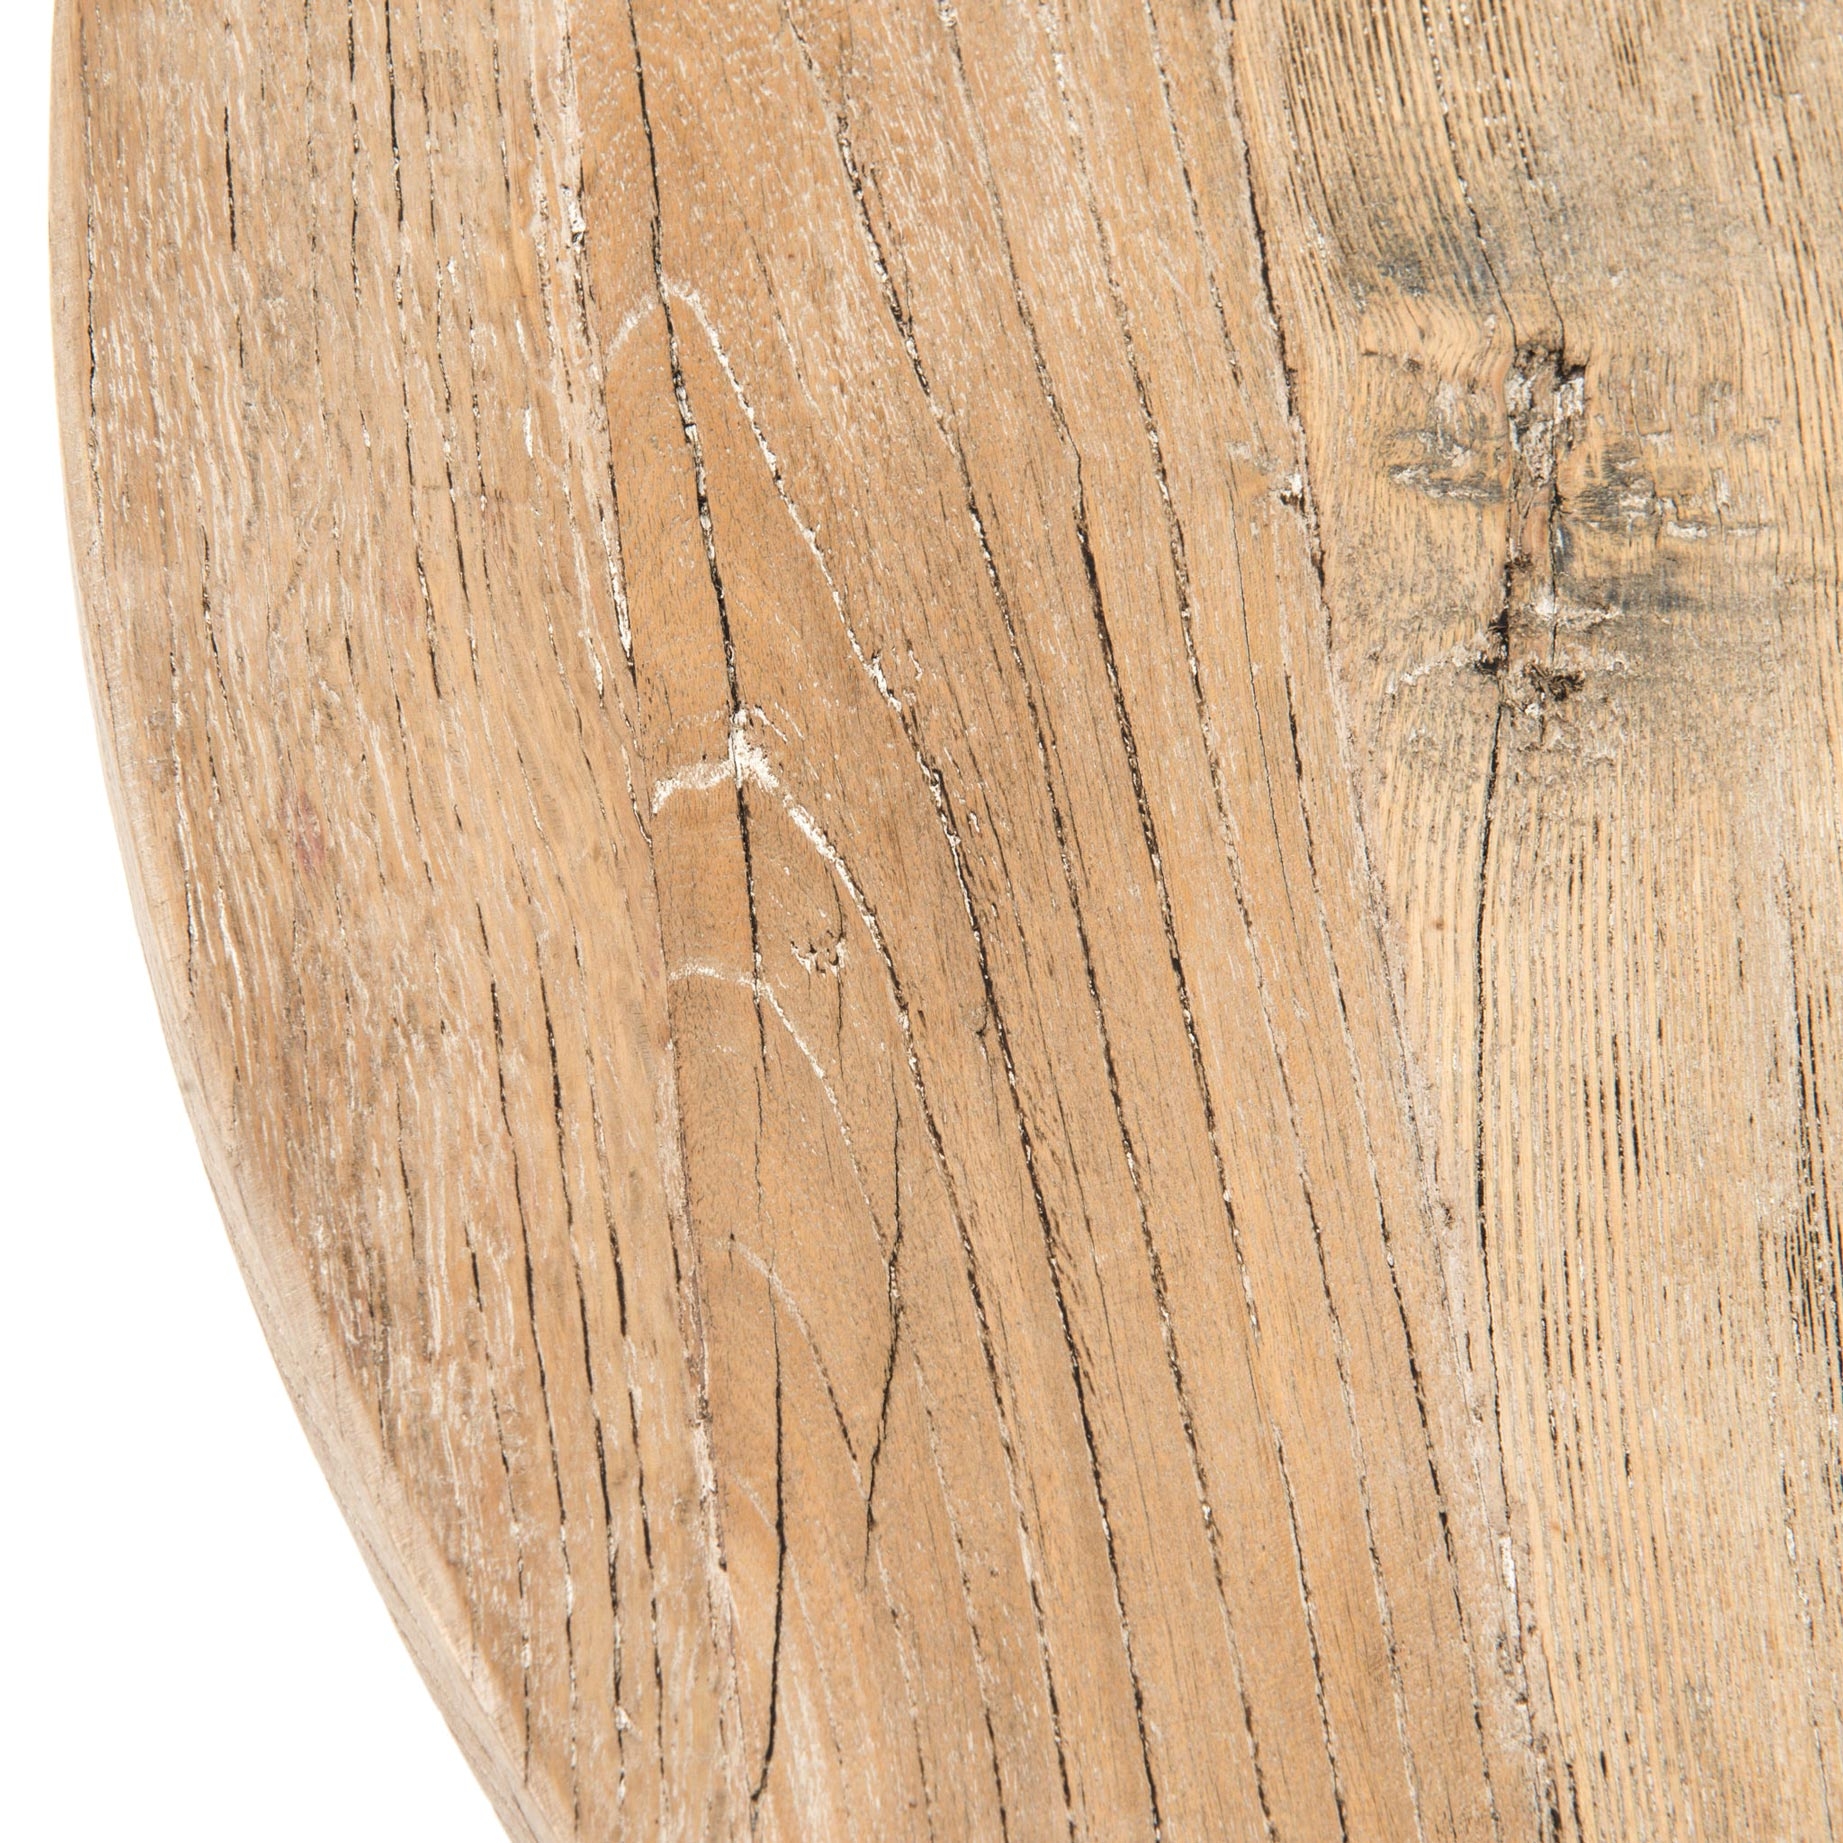 Delon French White Wash Reclaimed Pine Bistro Table - Image 1